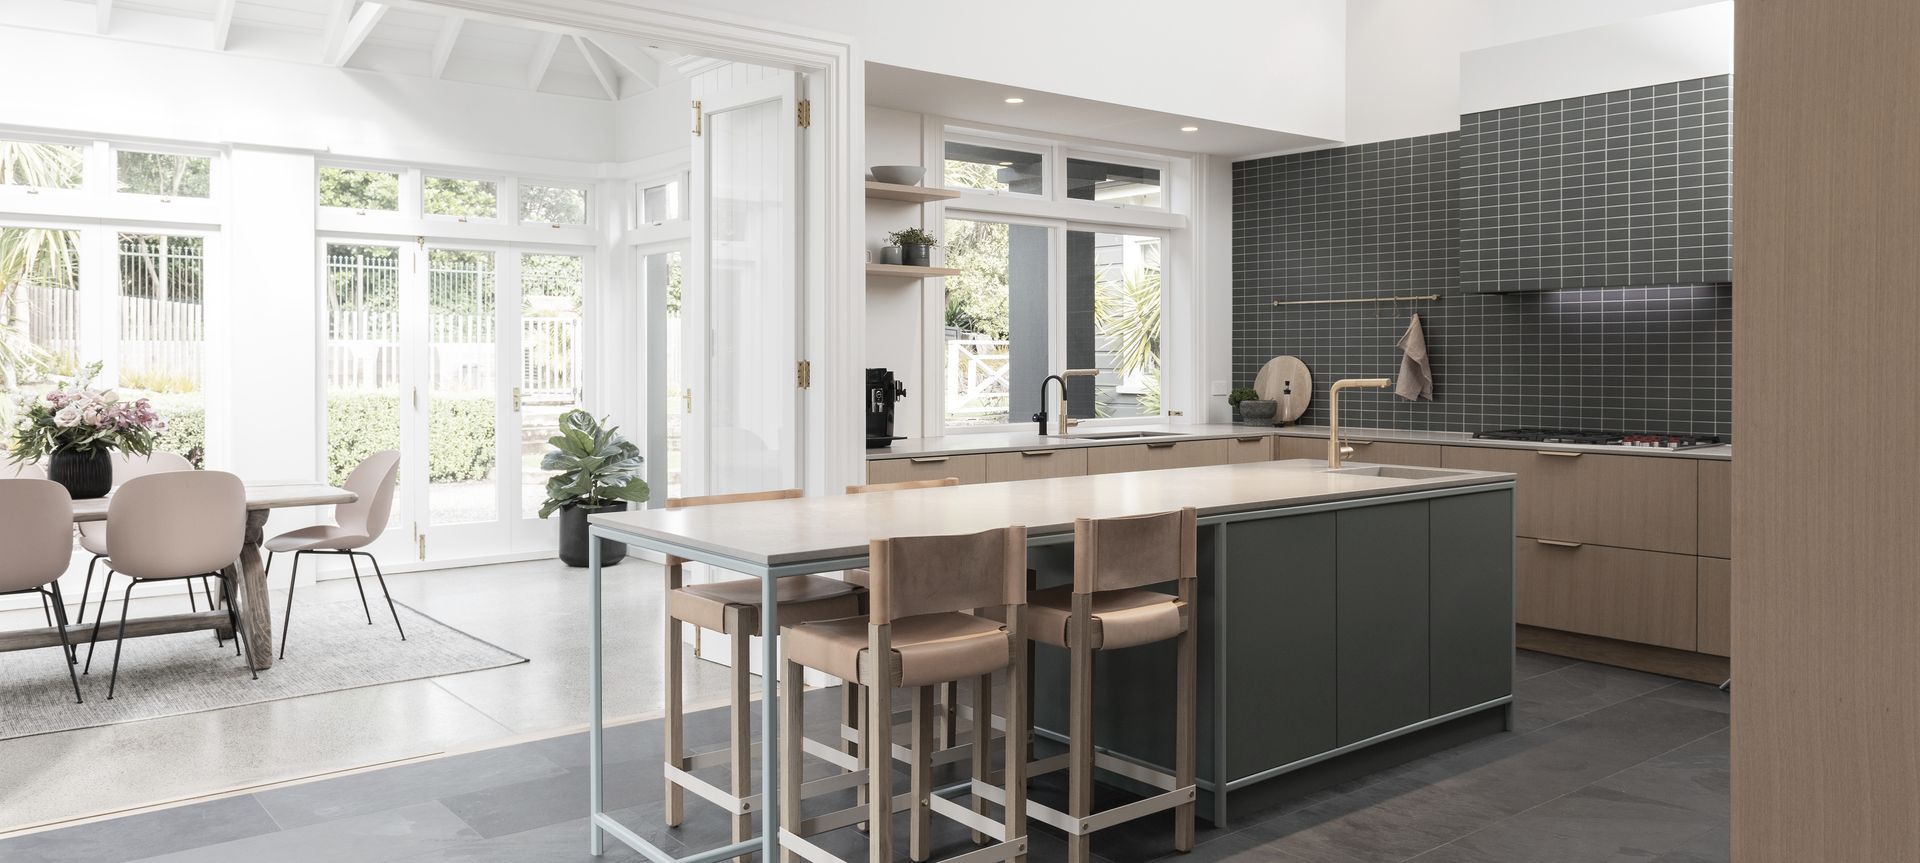 Devonport Jewel by DBJ - The Craft of Custom Cabinetry | ArchiPro NZ